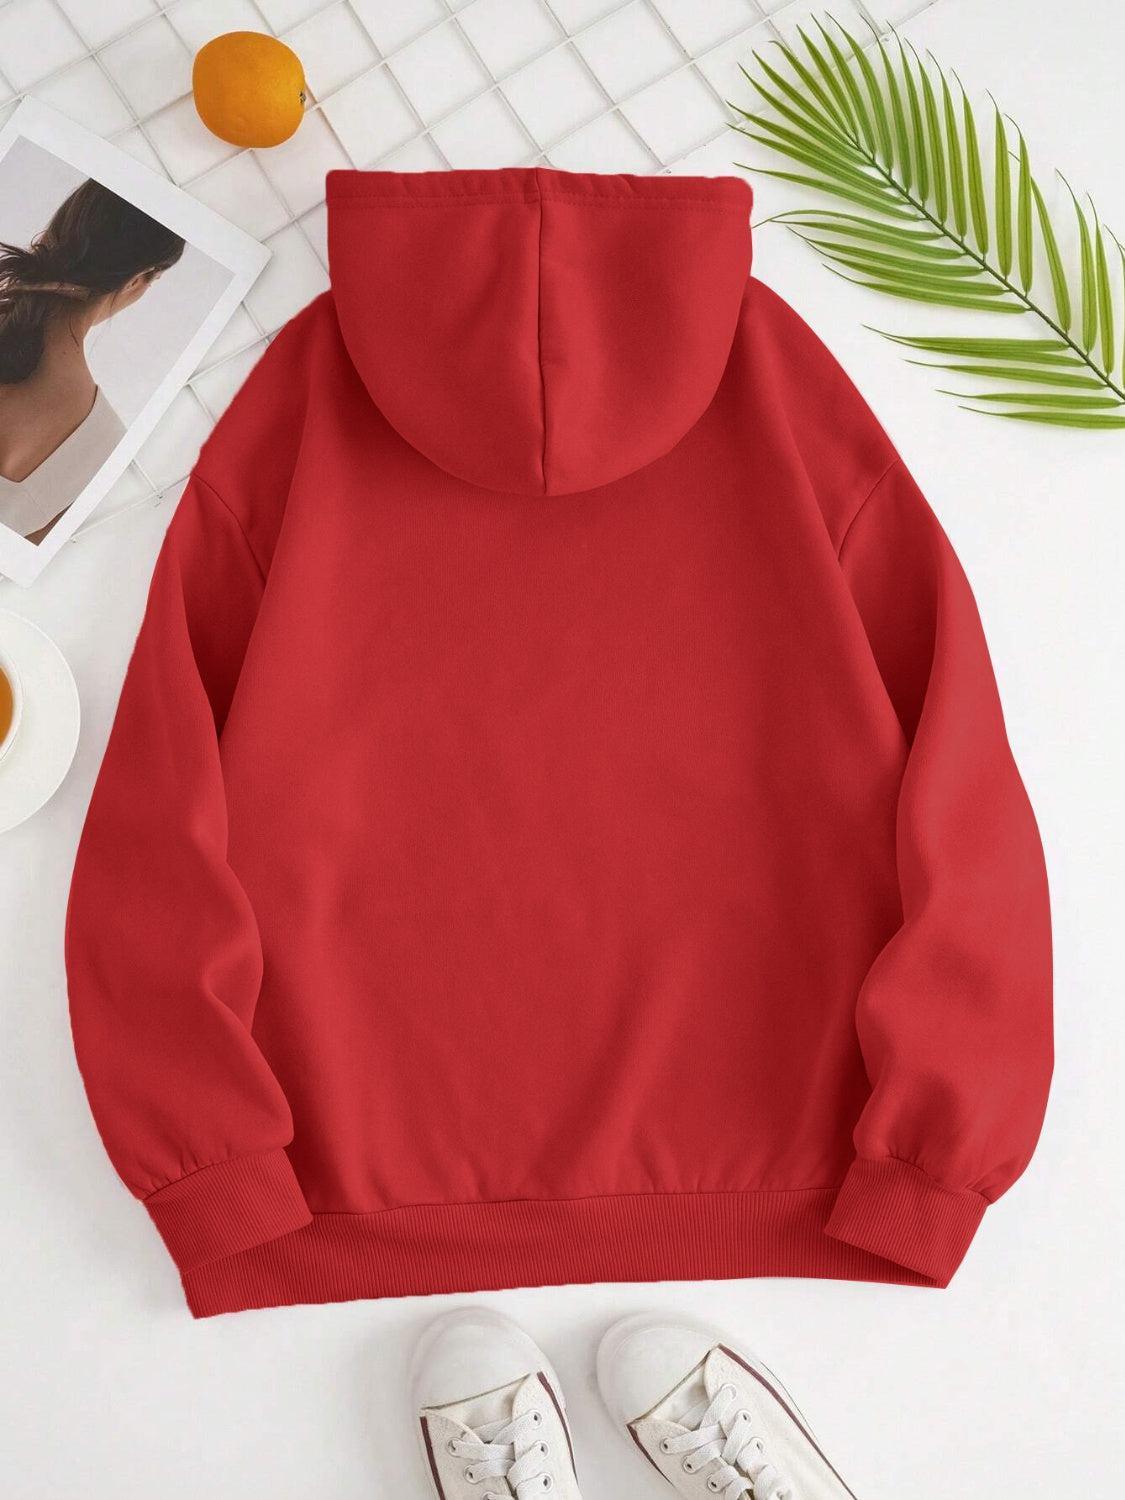 a red hoodie with a pair of white shoes next to it